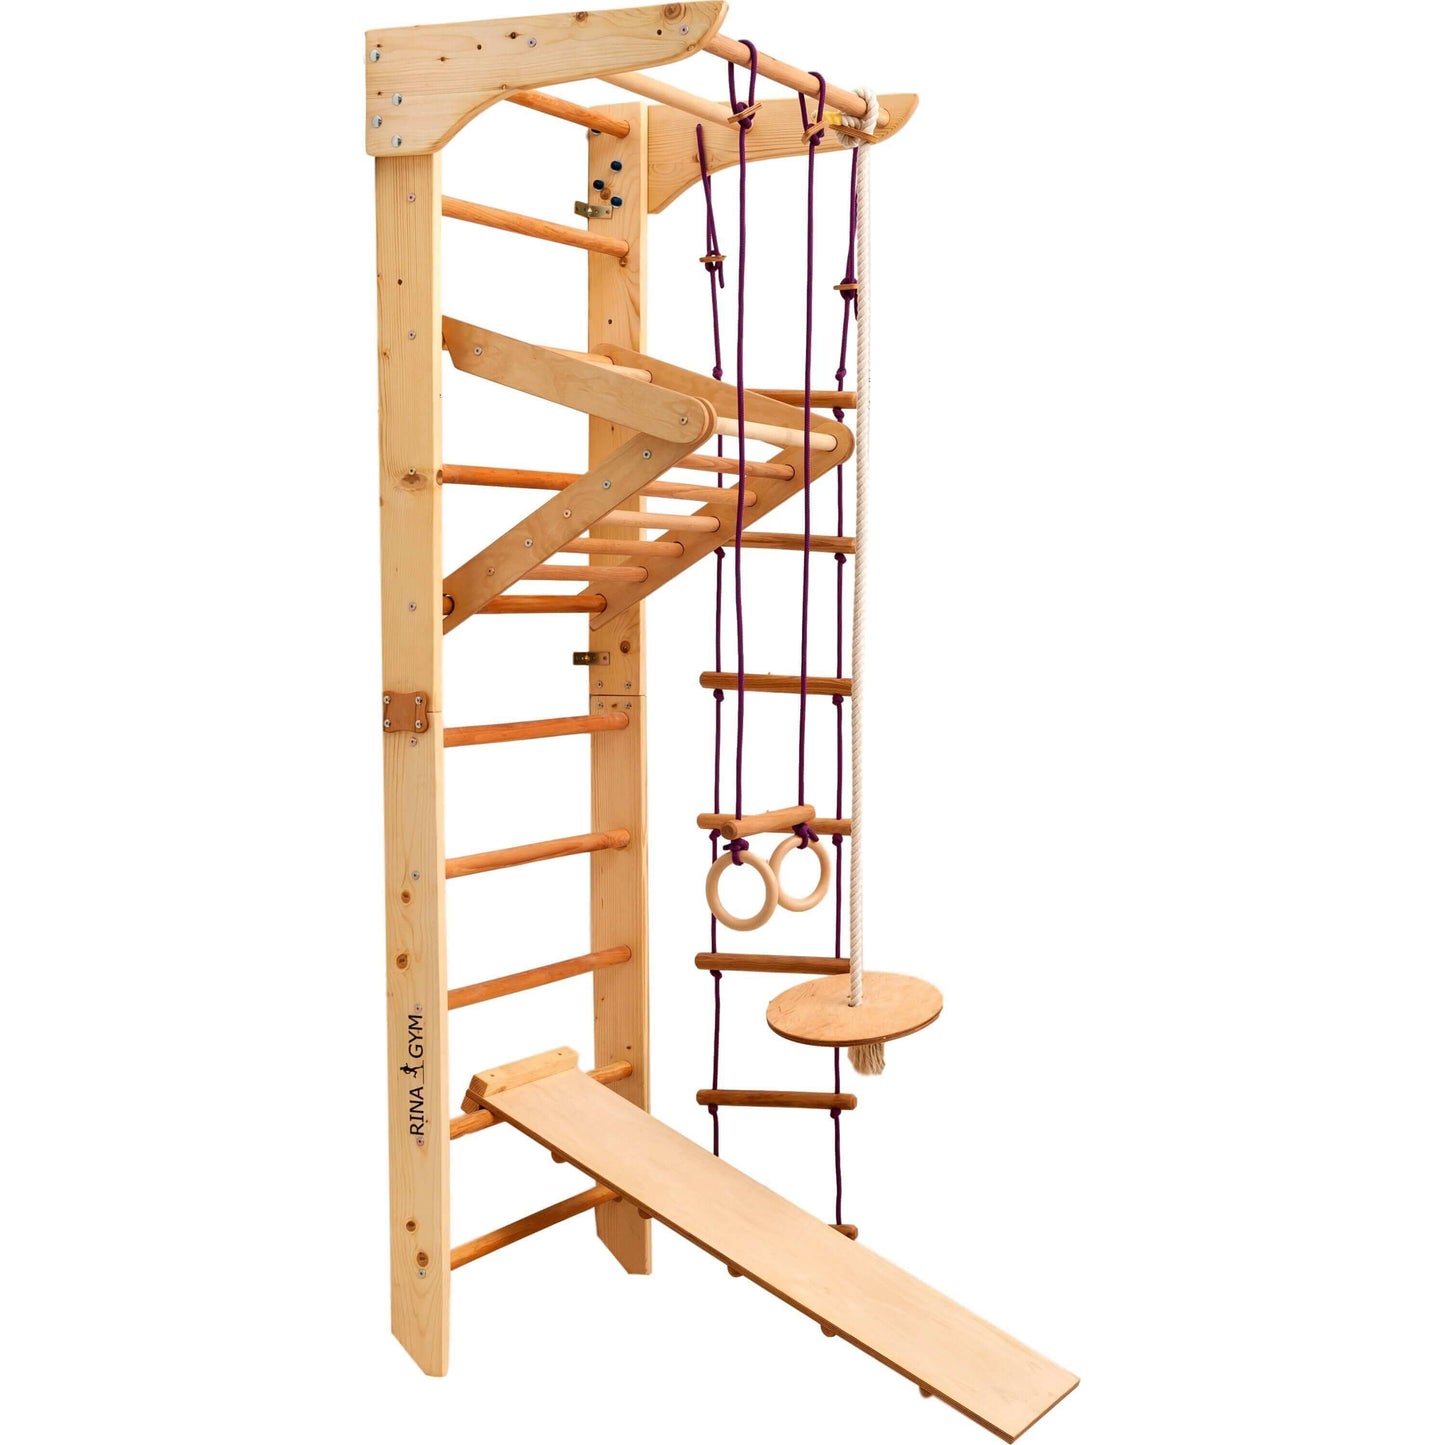 Climbing wall INA for children, untreated wood